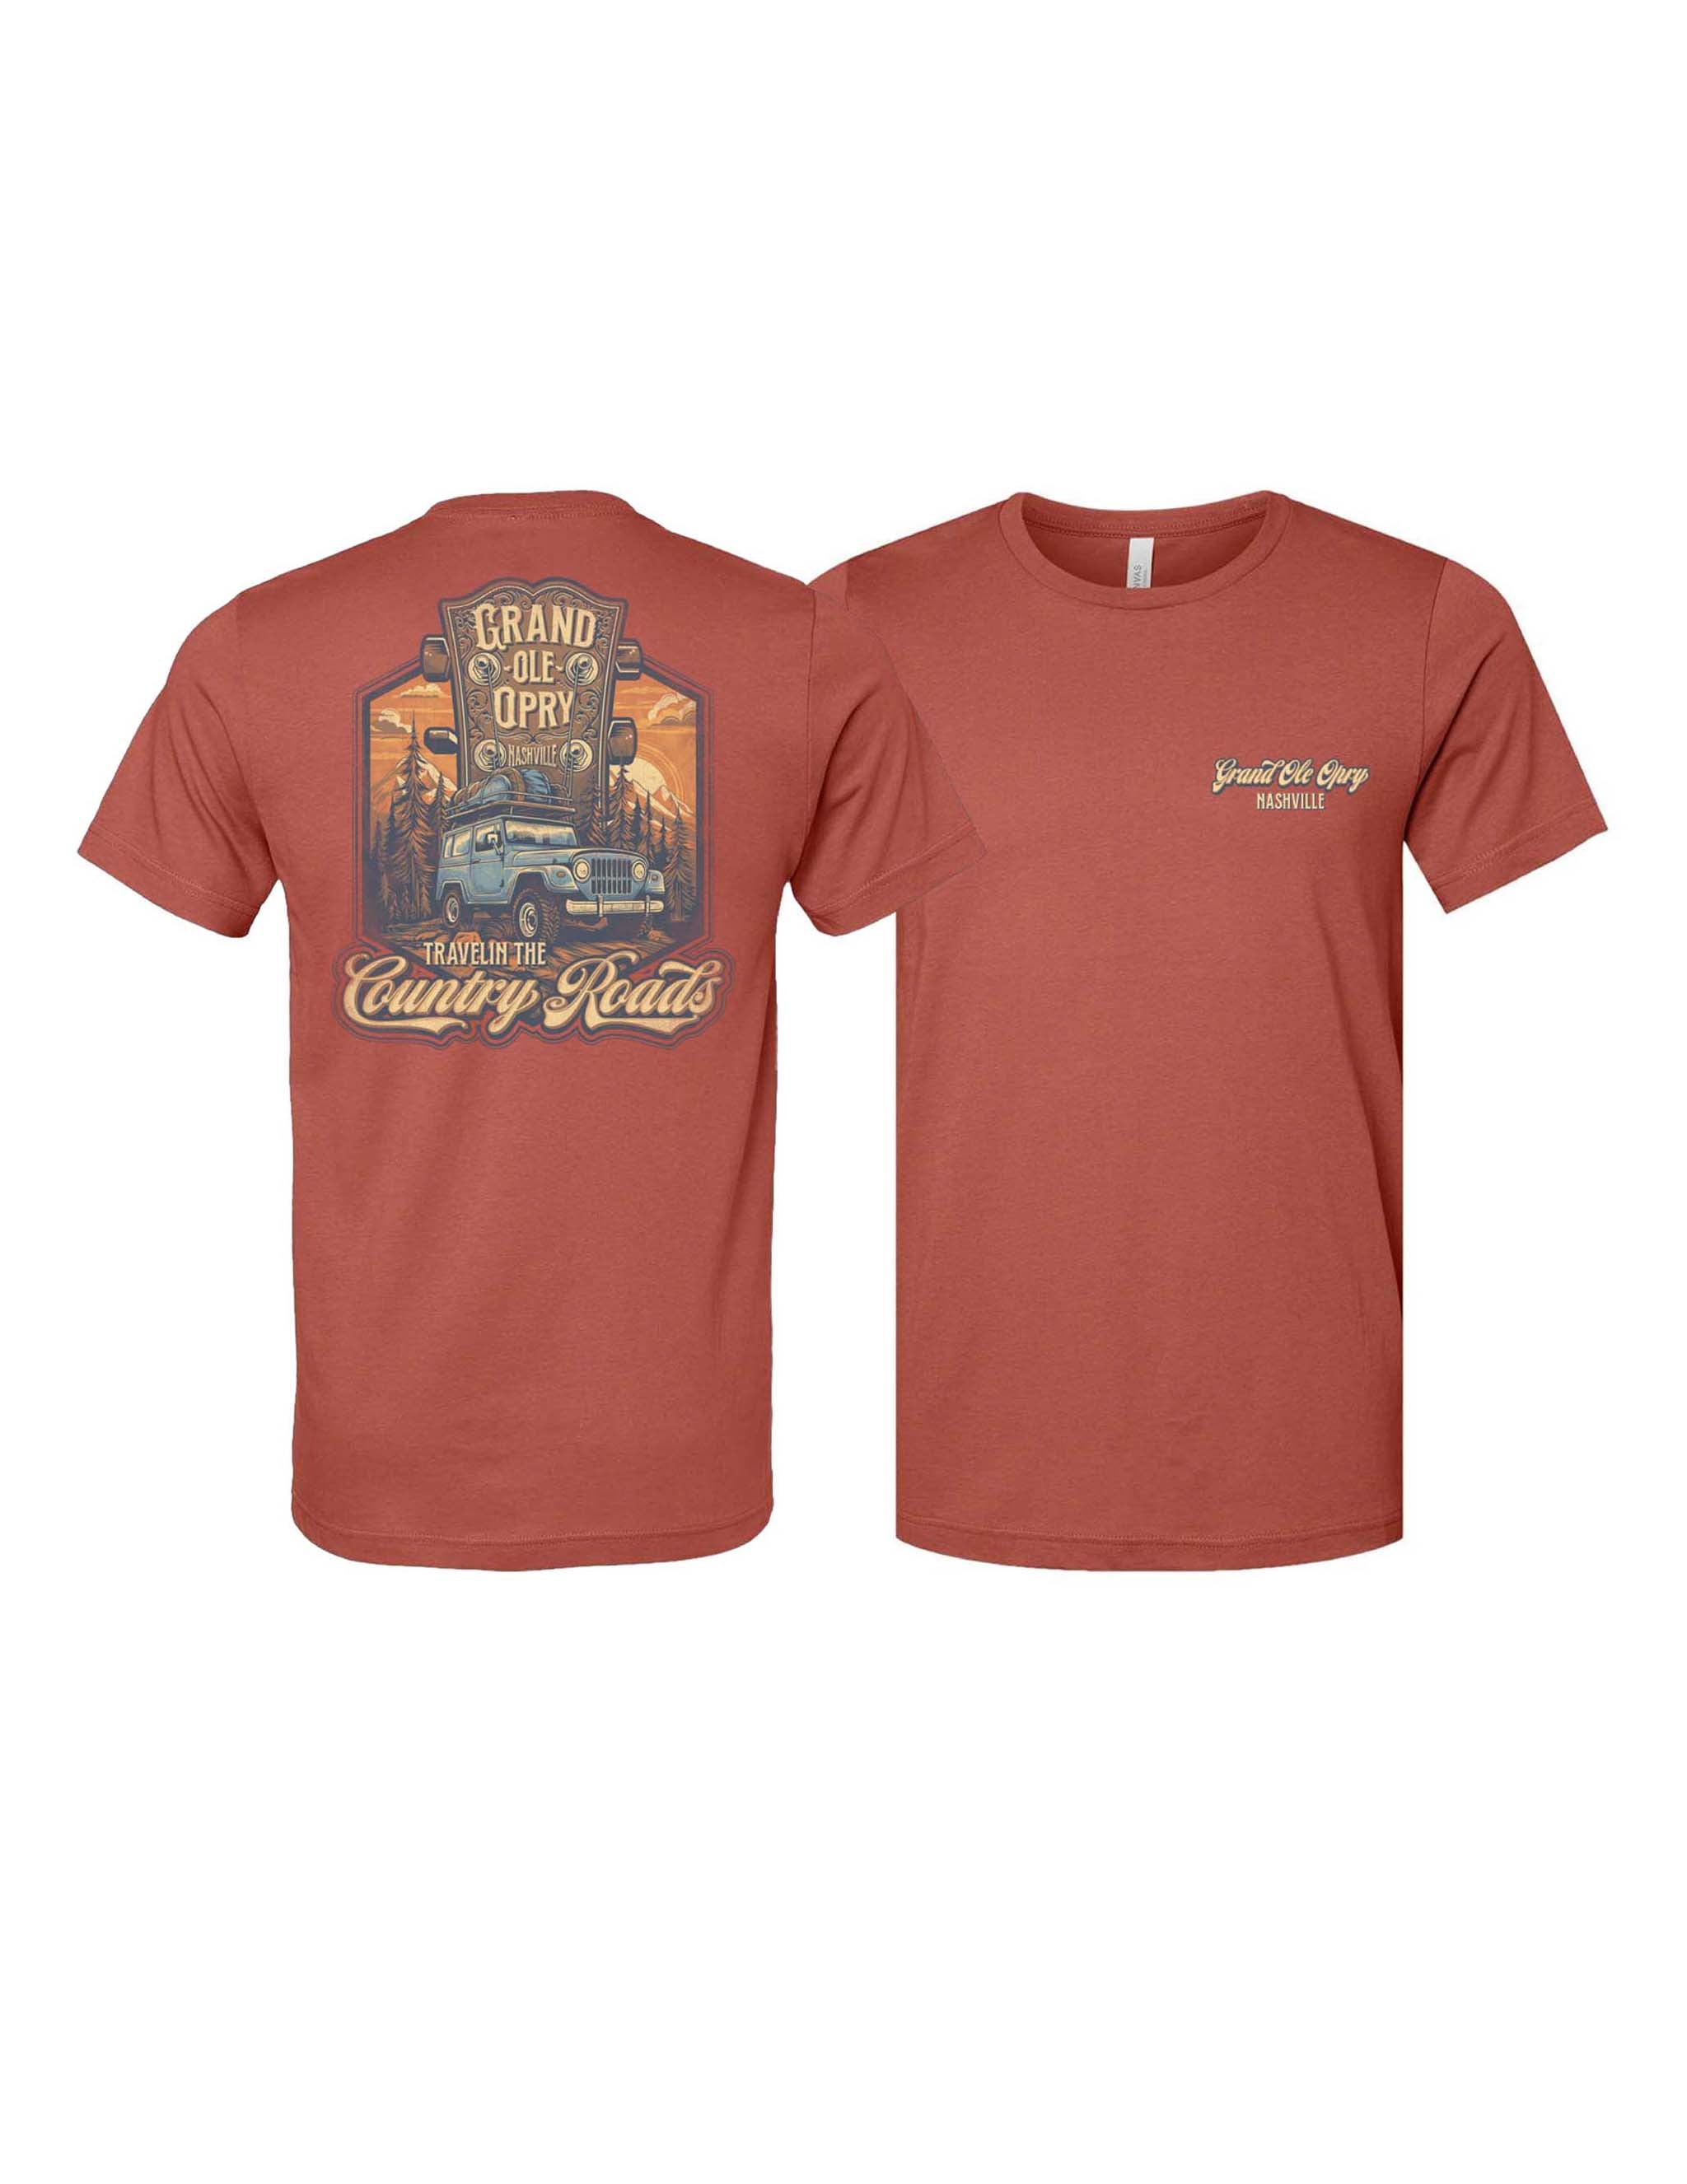 Opry Country Roads Tour T-Shirt